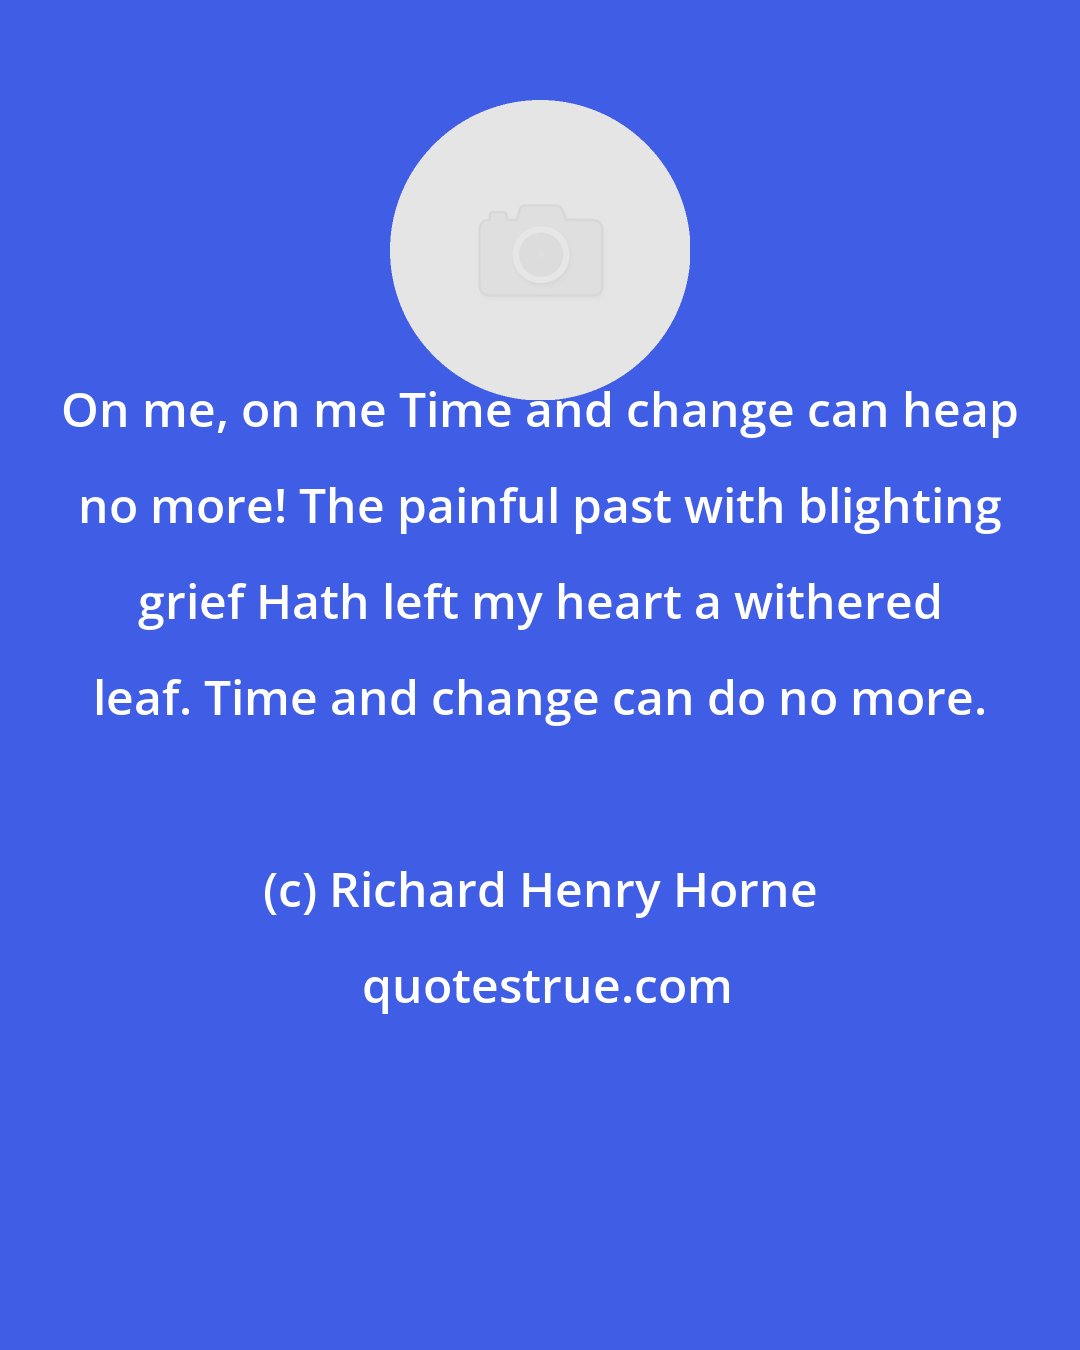 Richard Henry Horne: On me, on me Time and change can heap no more! The painful past with blighting grief Hath left my heart a withered leaf. Time and change can do no more.